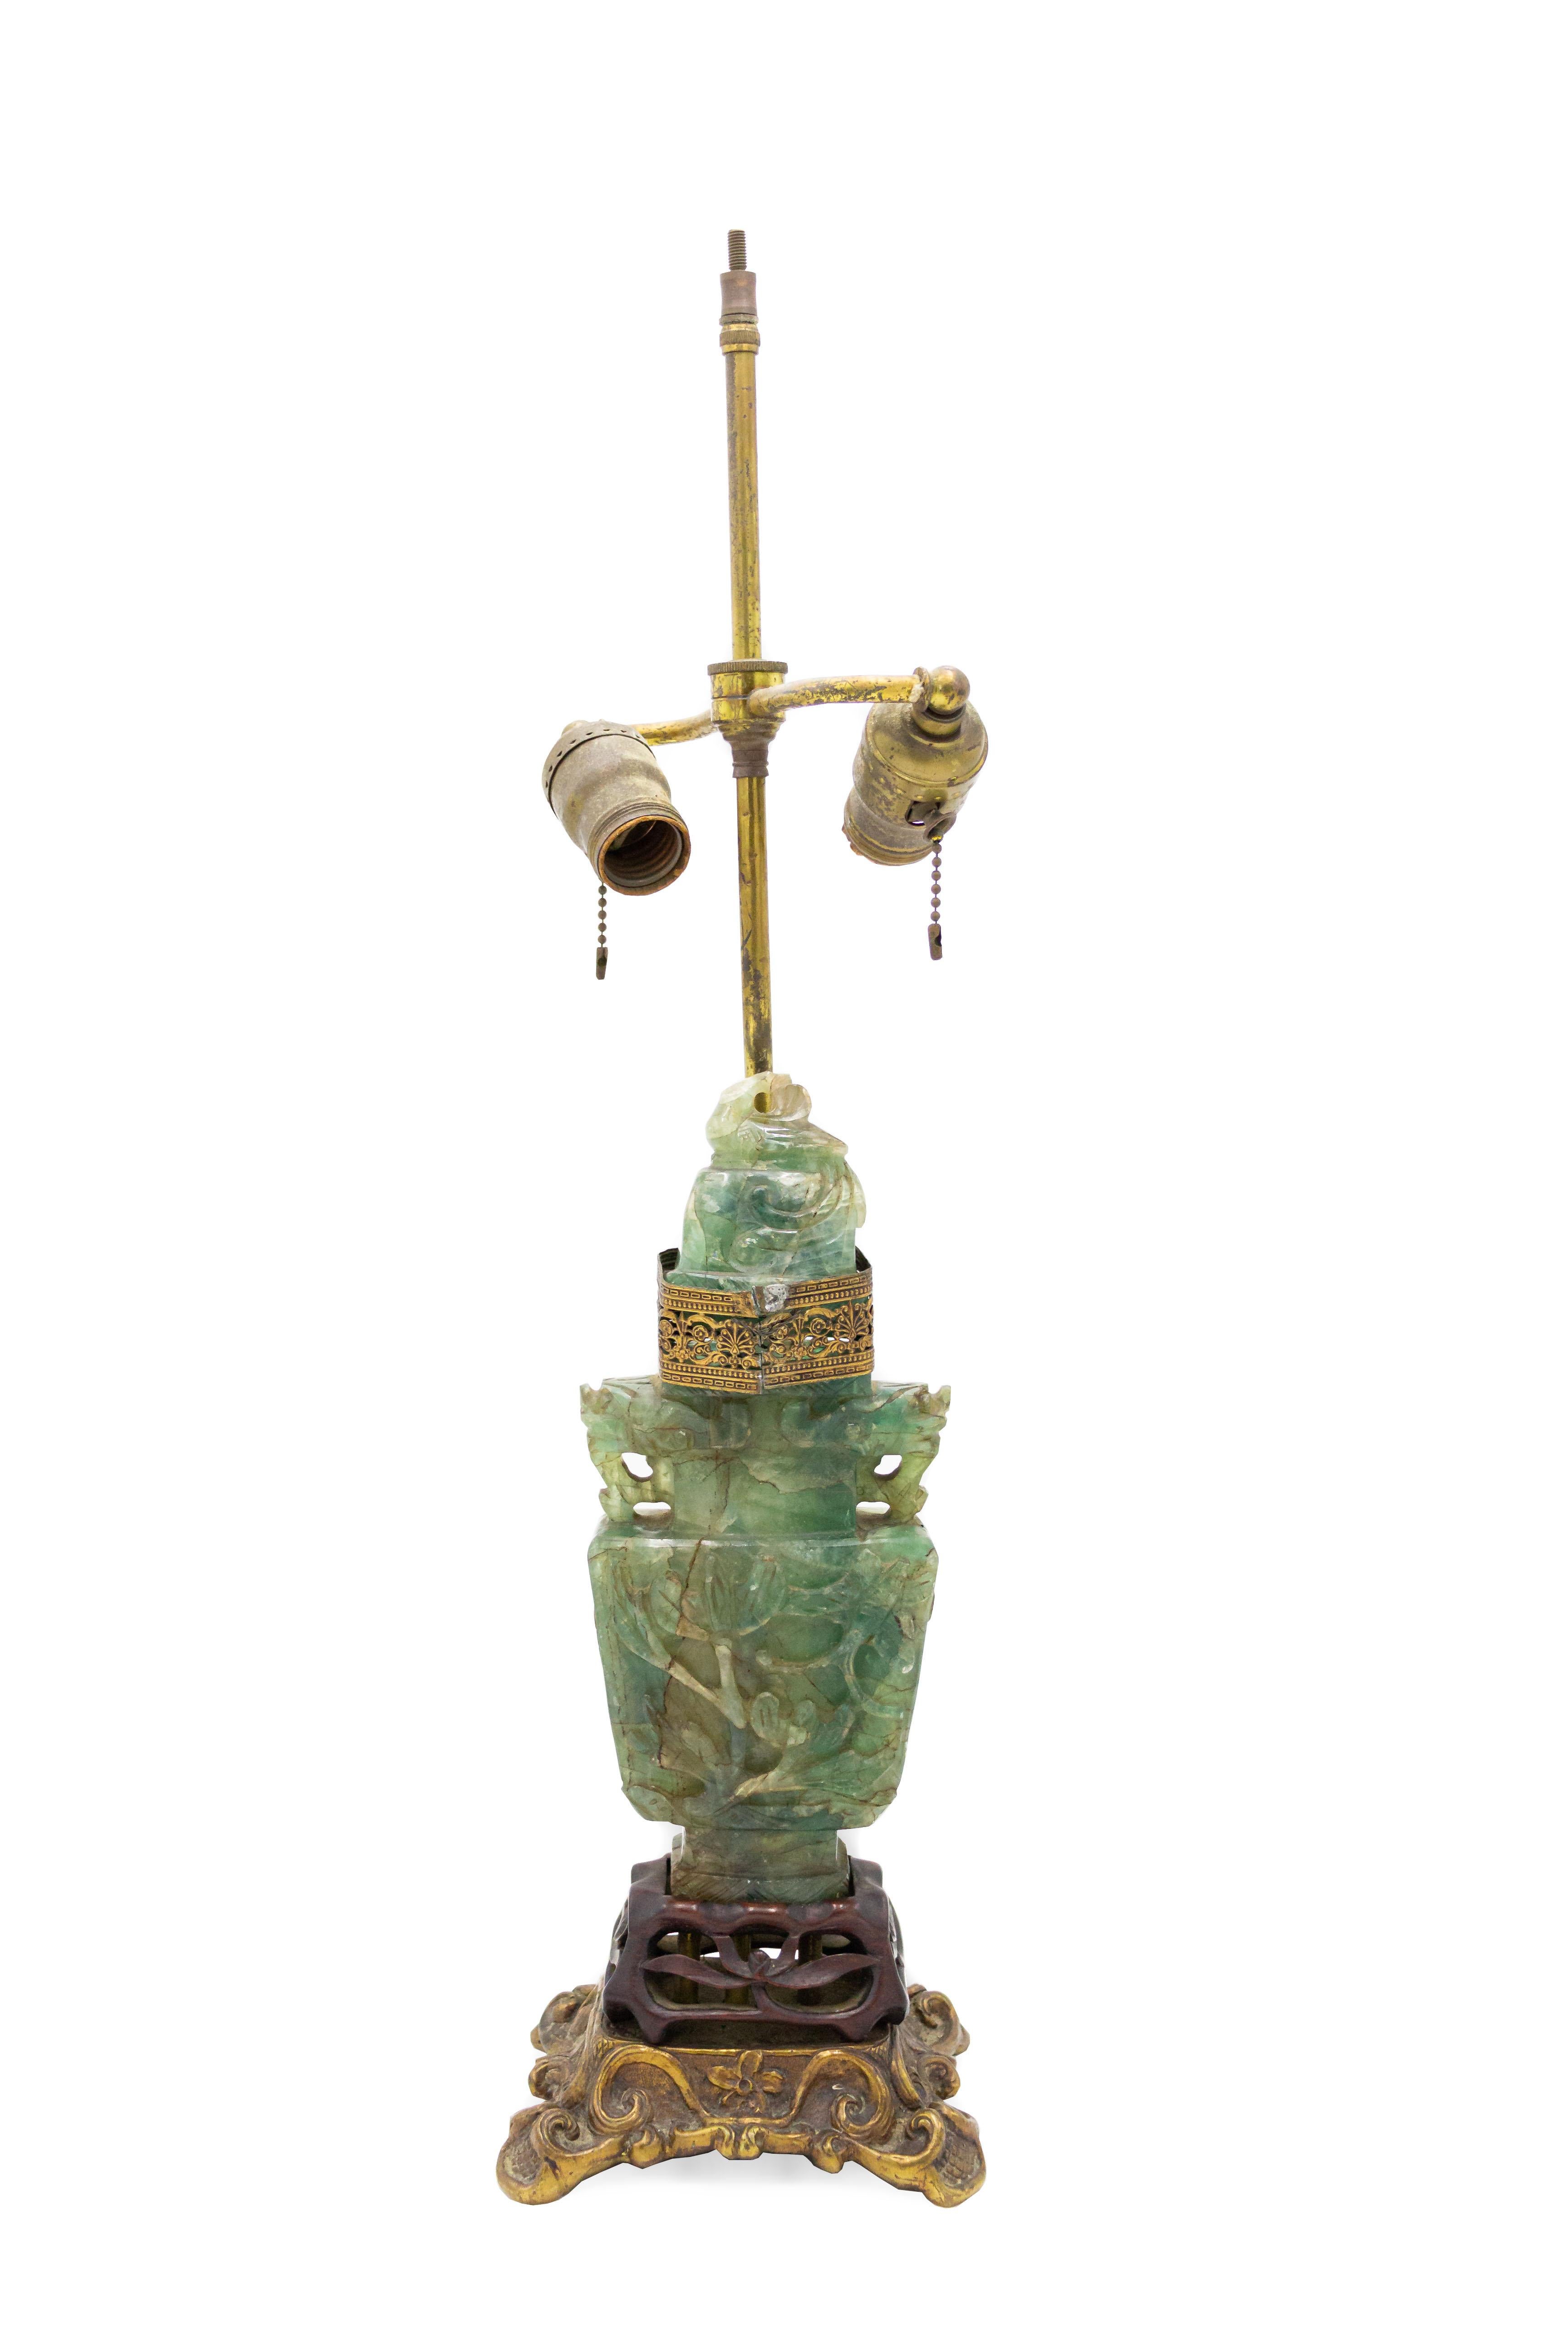 Pair of Chinese jade-colored hardstone lamps with carved teak and gilt metal bases and pierced gilt metal trim with a decorative motif.